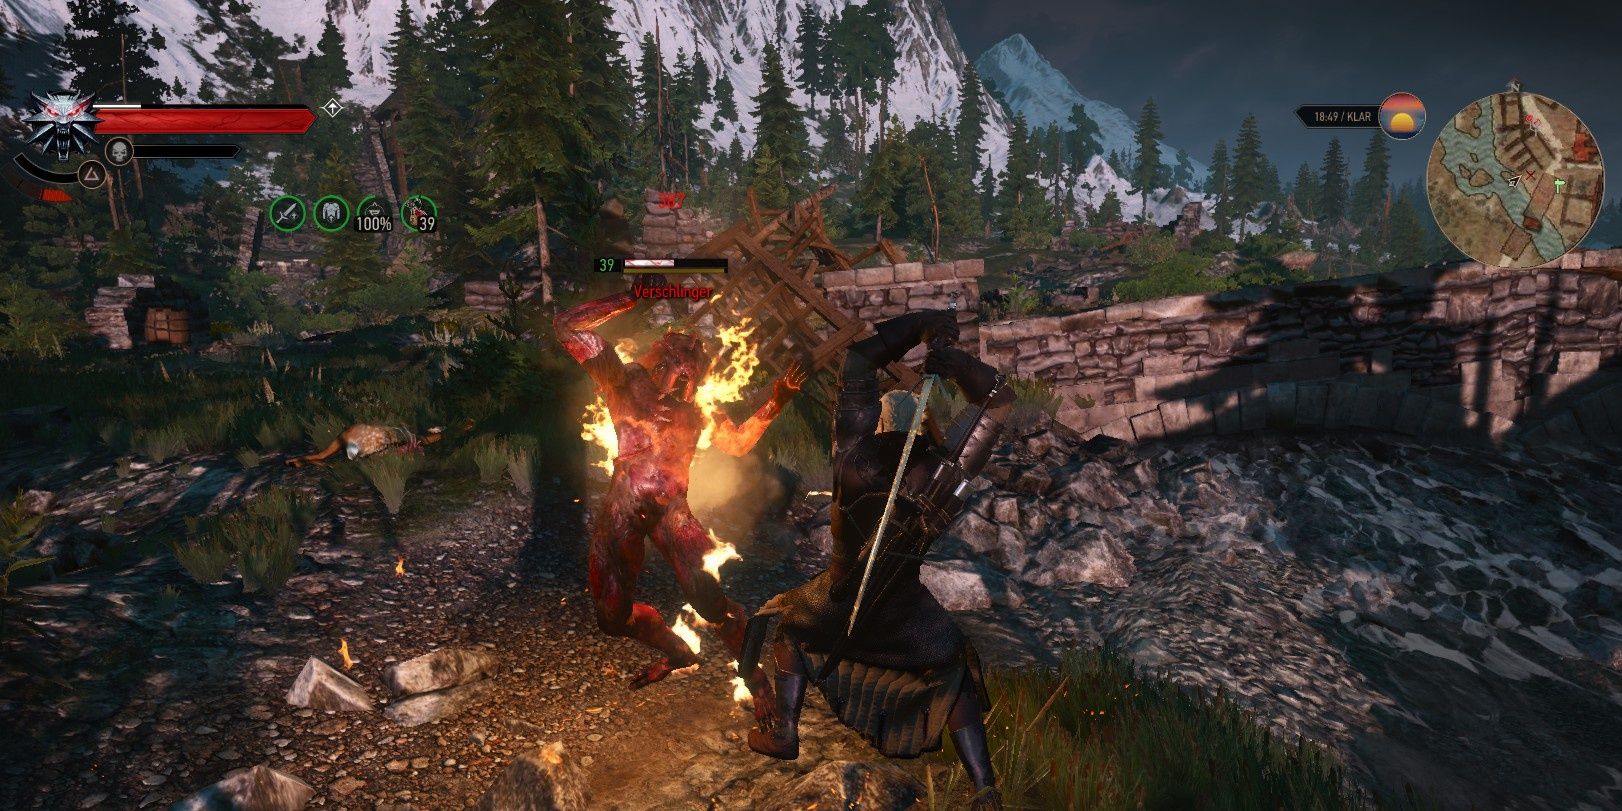 Rend in The Witcher 3